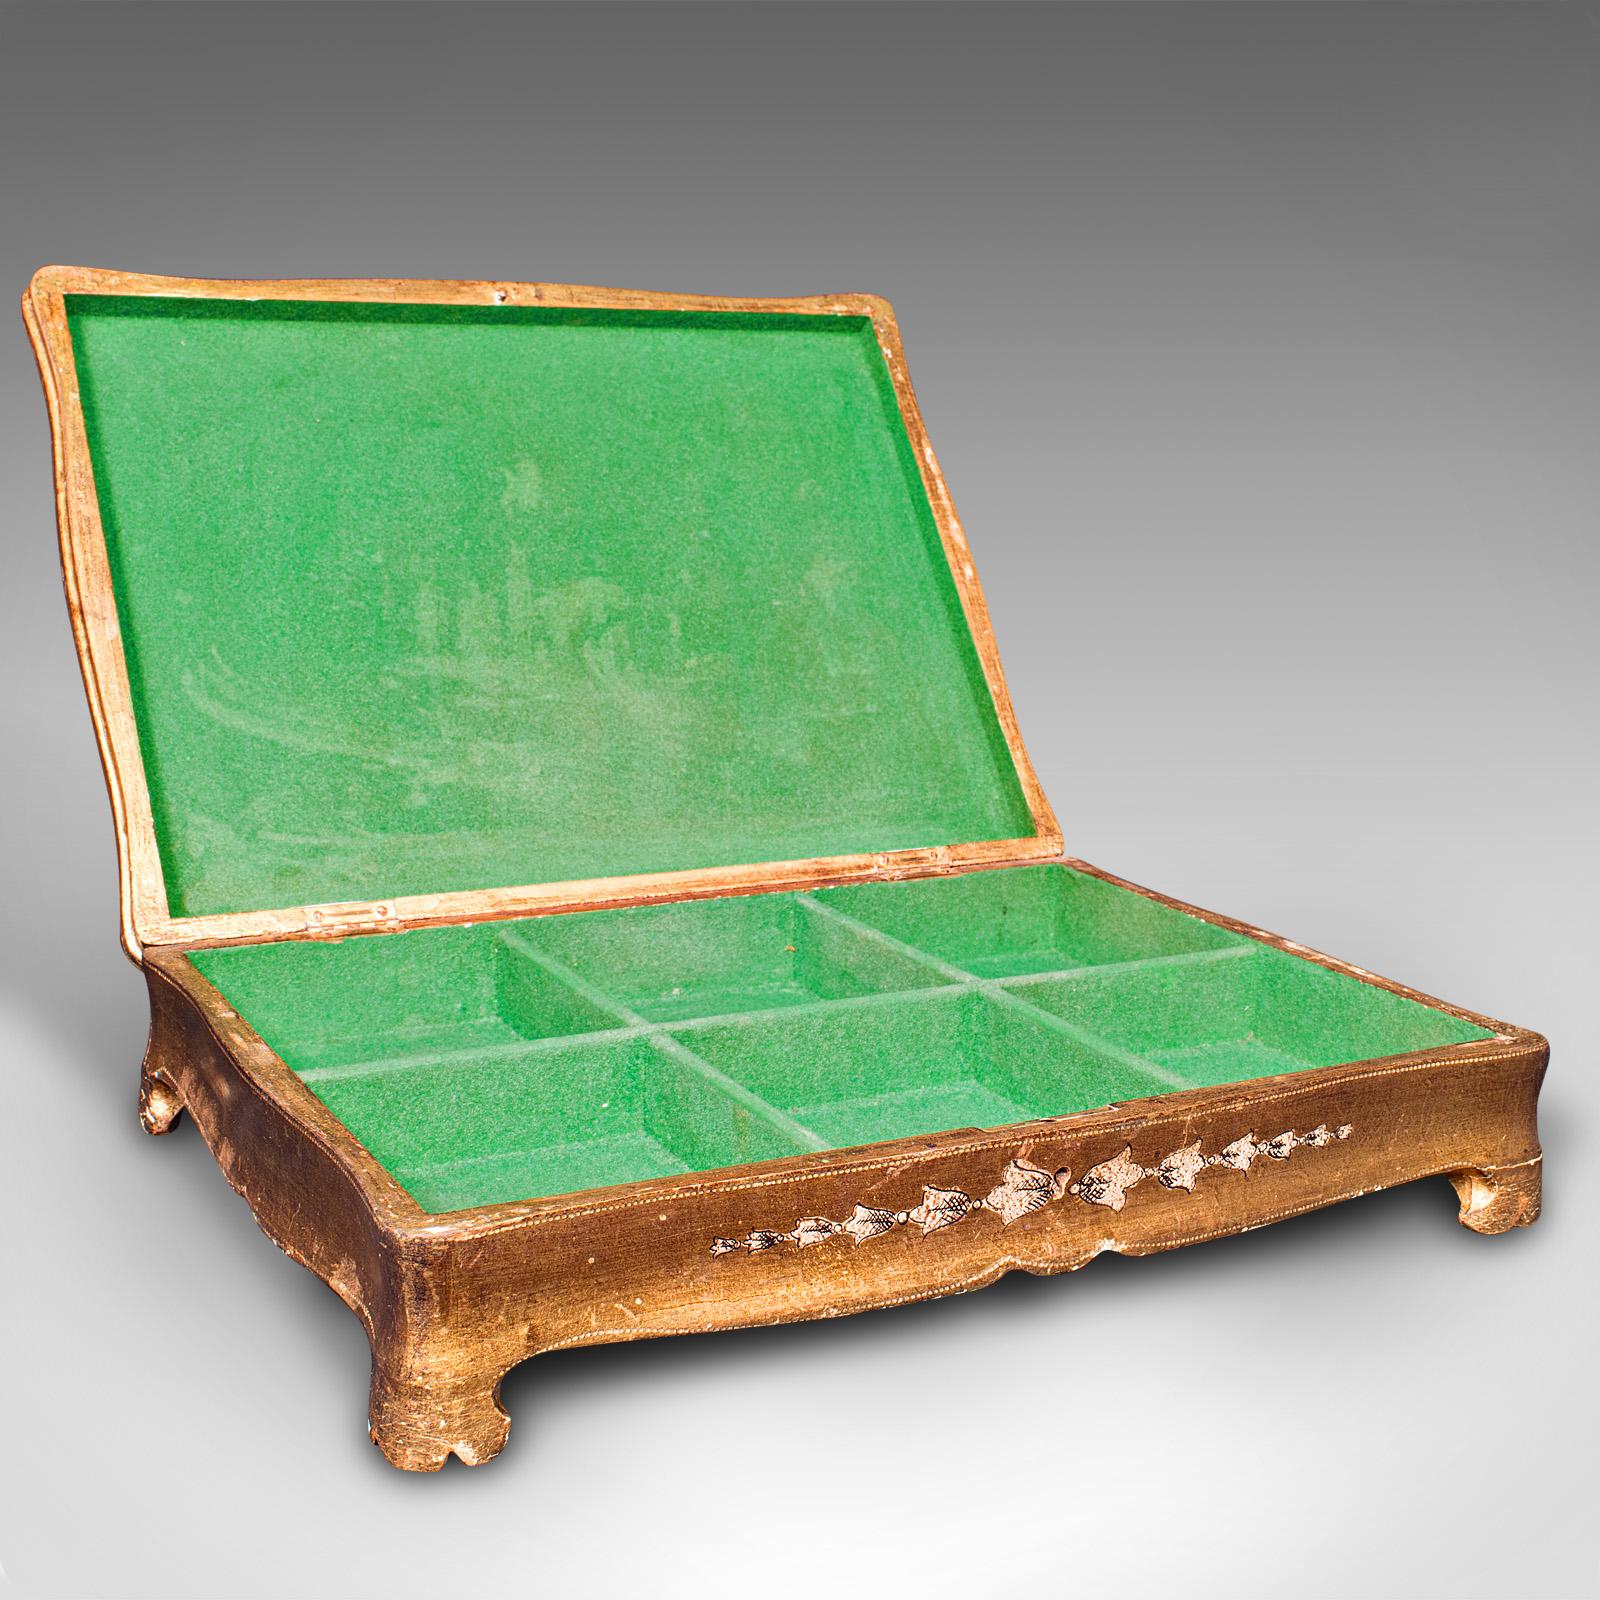 This is a vintage watch case. An Italian, giltwood decorative jewellery box, dating to the mid 20th century, circa 1950.

Eye-catching golden hues adorn this fascinating mid century Italianate box
Displays a desirable aged patina and in good